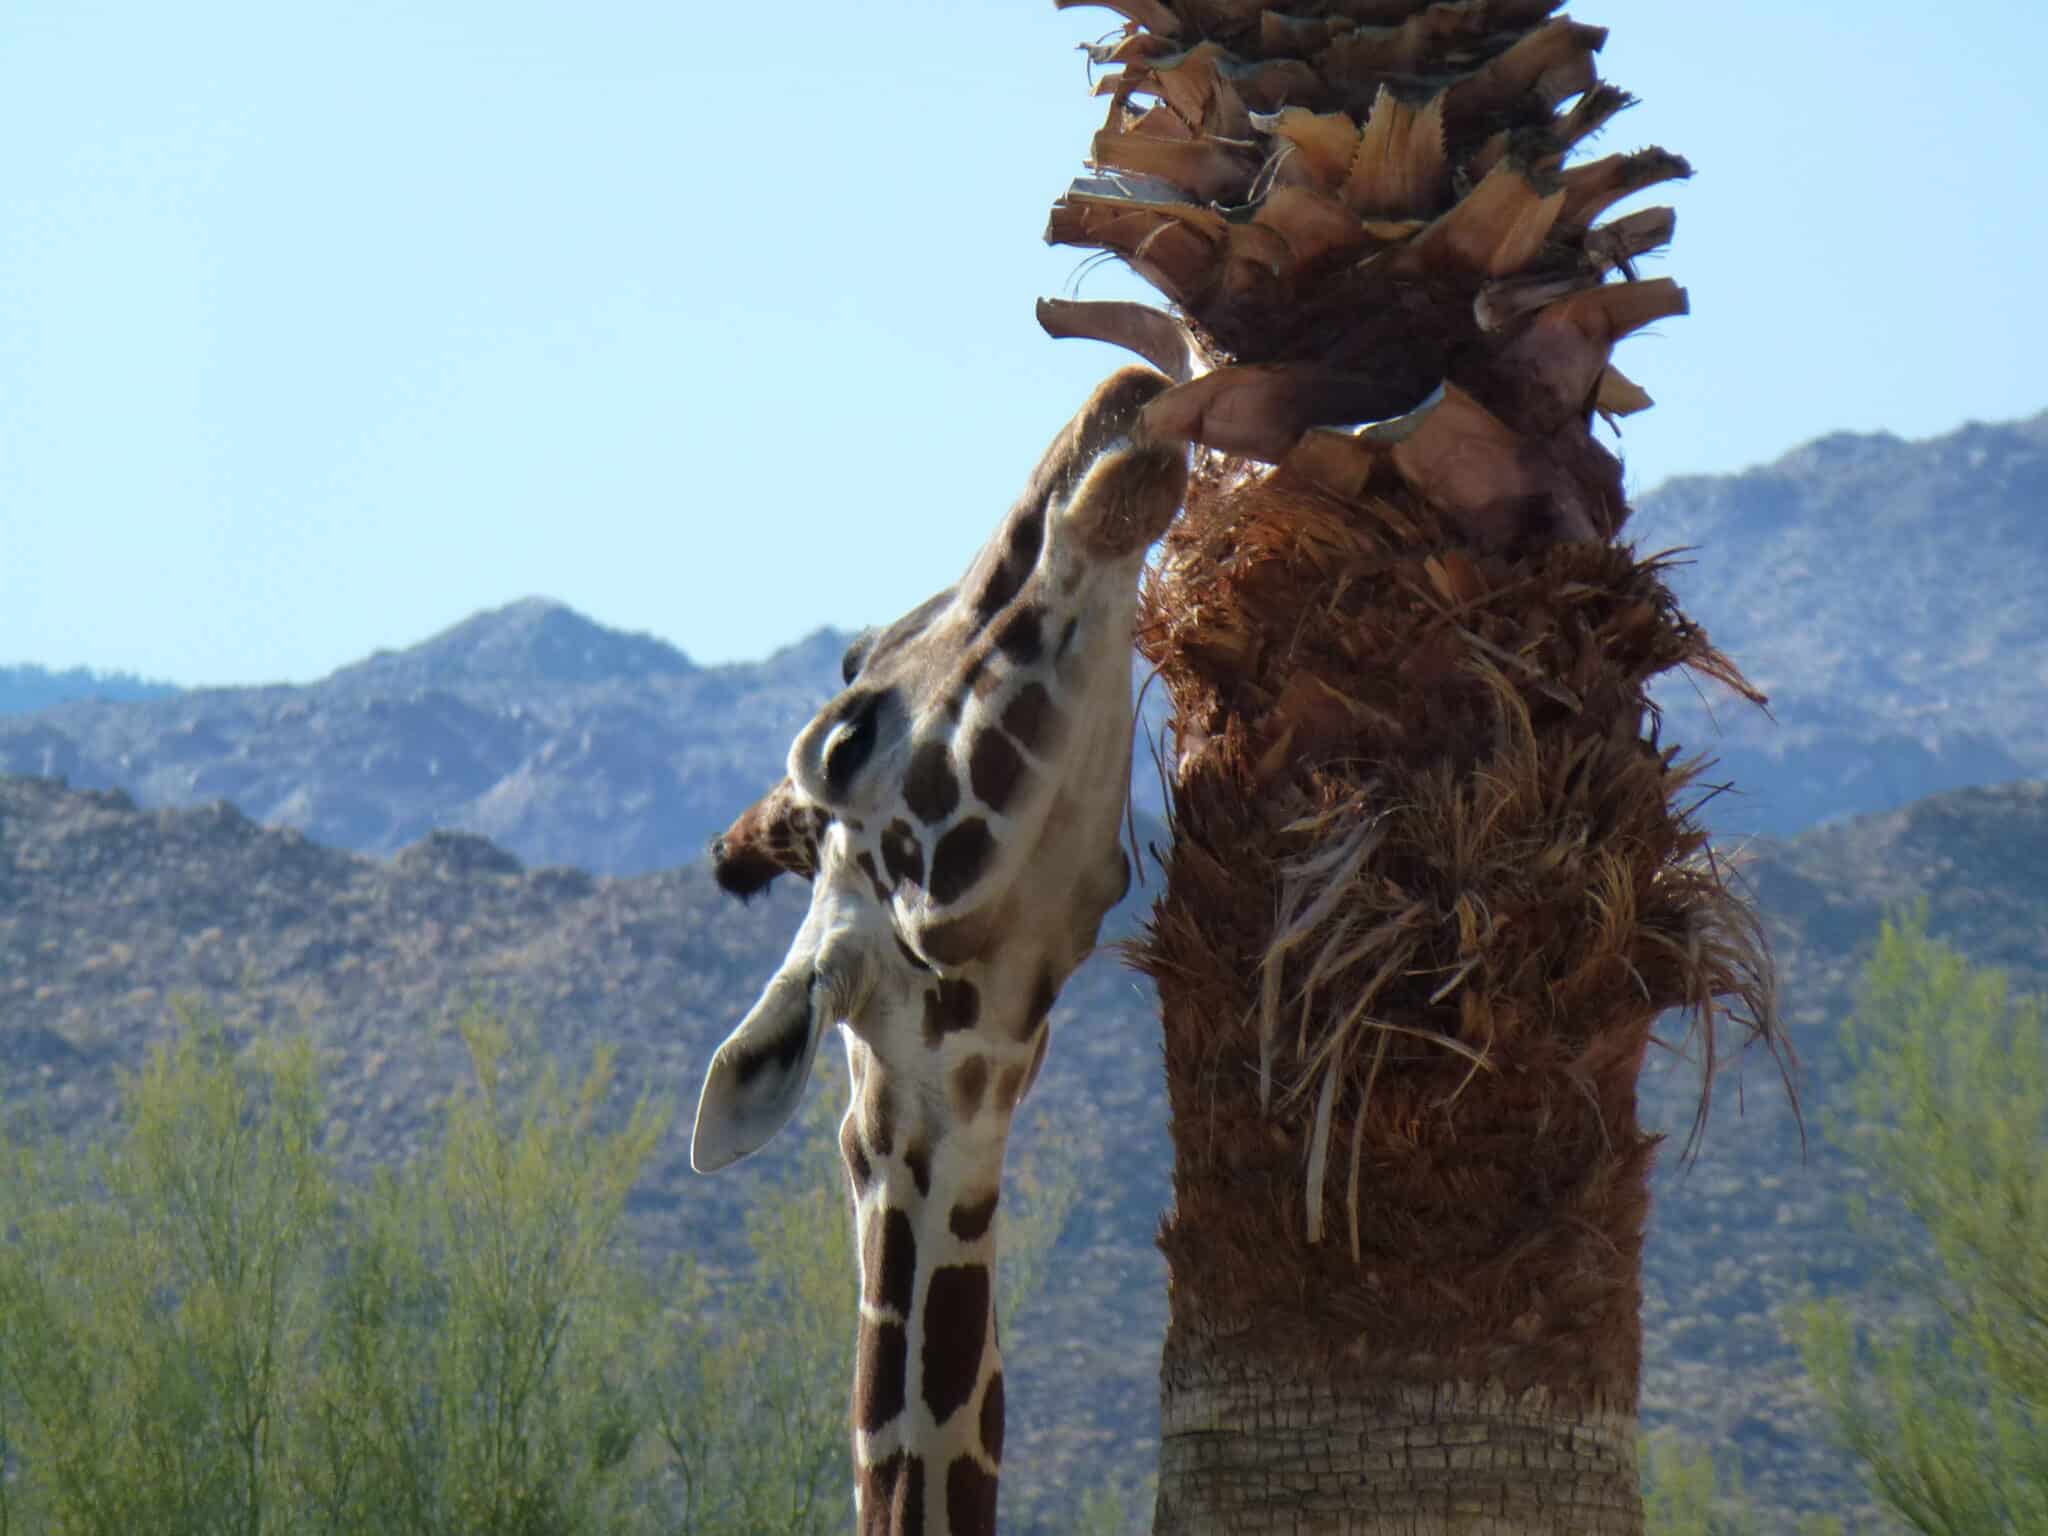 A giraffe searches for a snack at the Living Desert